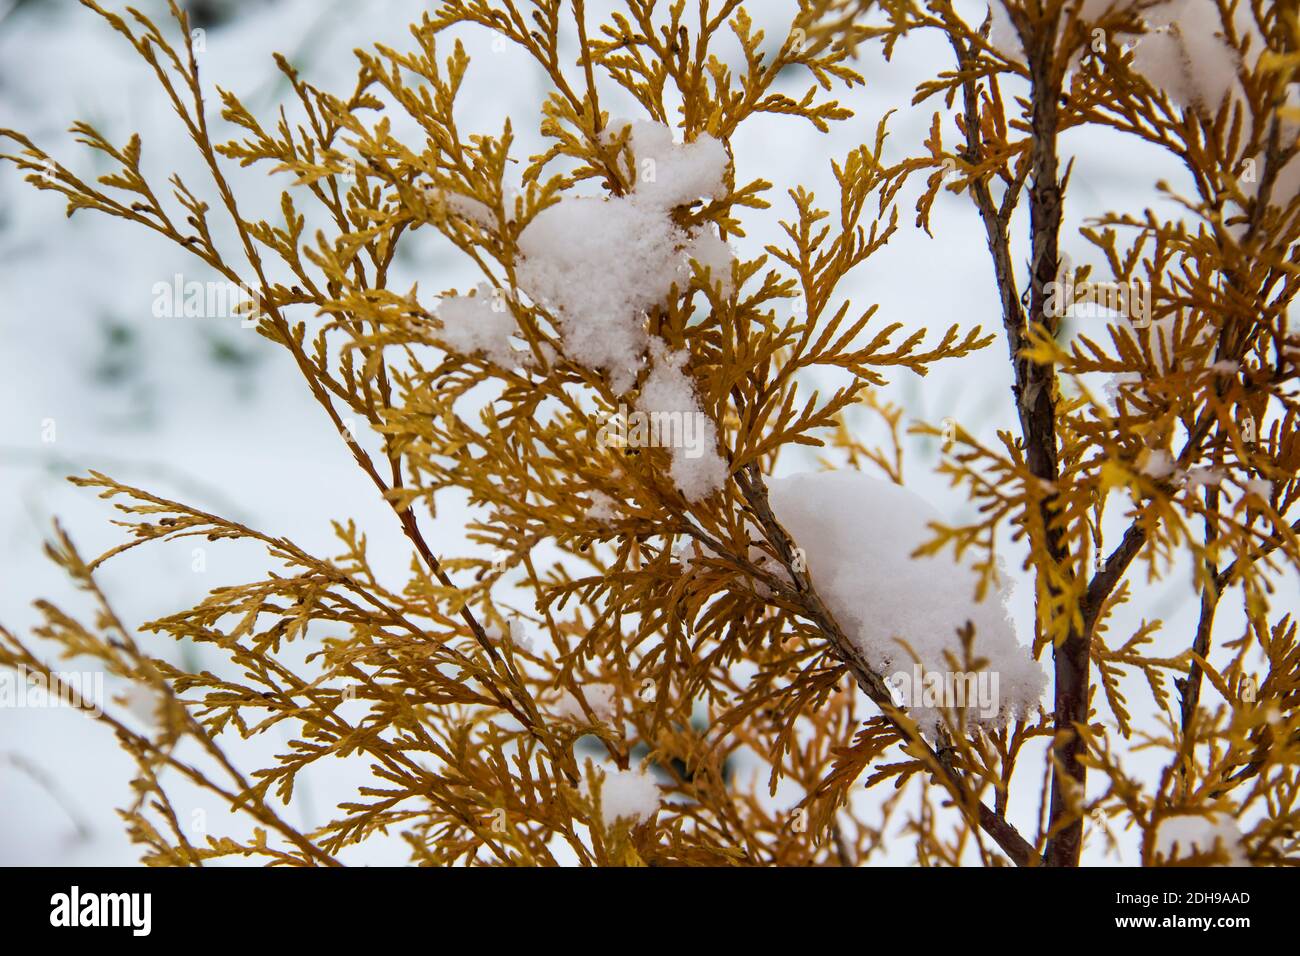 A beautiful leaves of coniferous tree Thuja. CloseUp of yellow leaves of Thuja trees against snow background Stock Photo